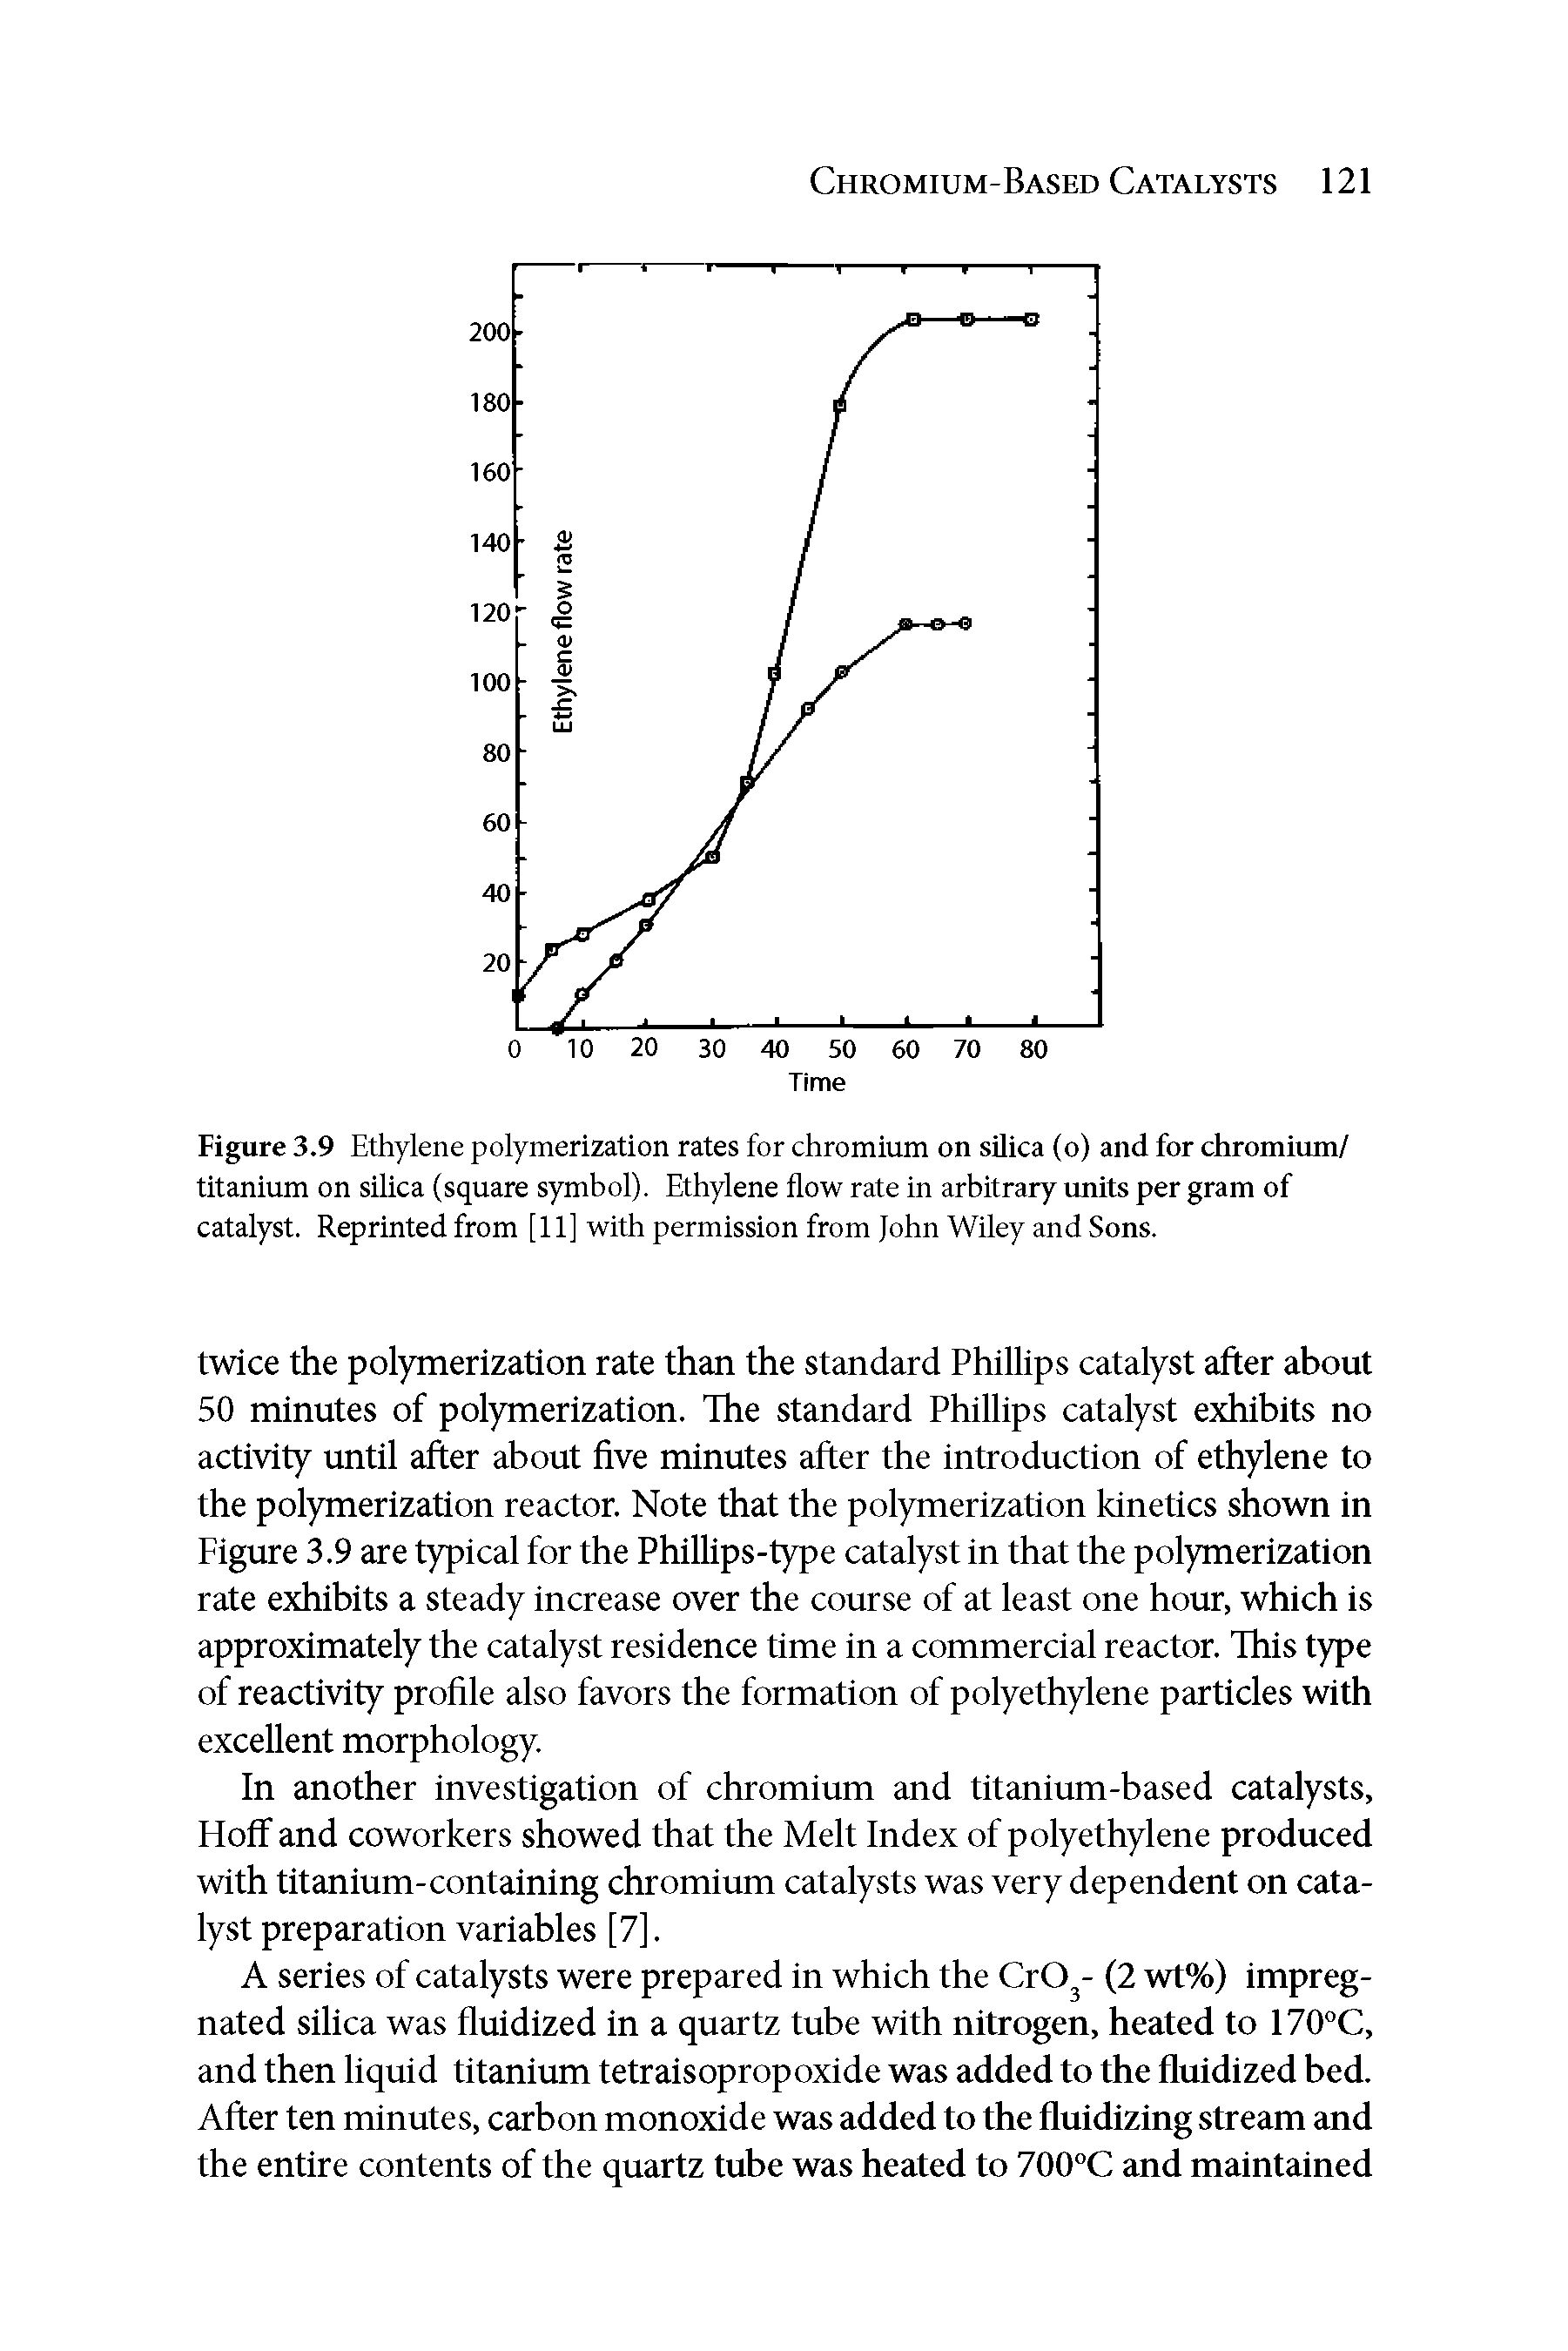 Figure 3.9 Ethylene polymerization rates for chromium on silica (o) and for chromium/ titanium on silica (square symbol). Ethylene flow rate in arbitrary imits per gram of catalyst. Reprinted from [11] with permission from John Wiley and Sons.